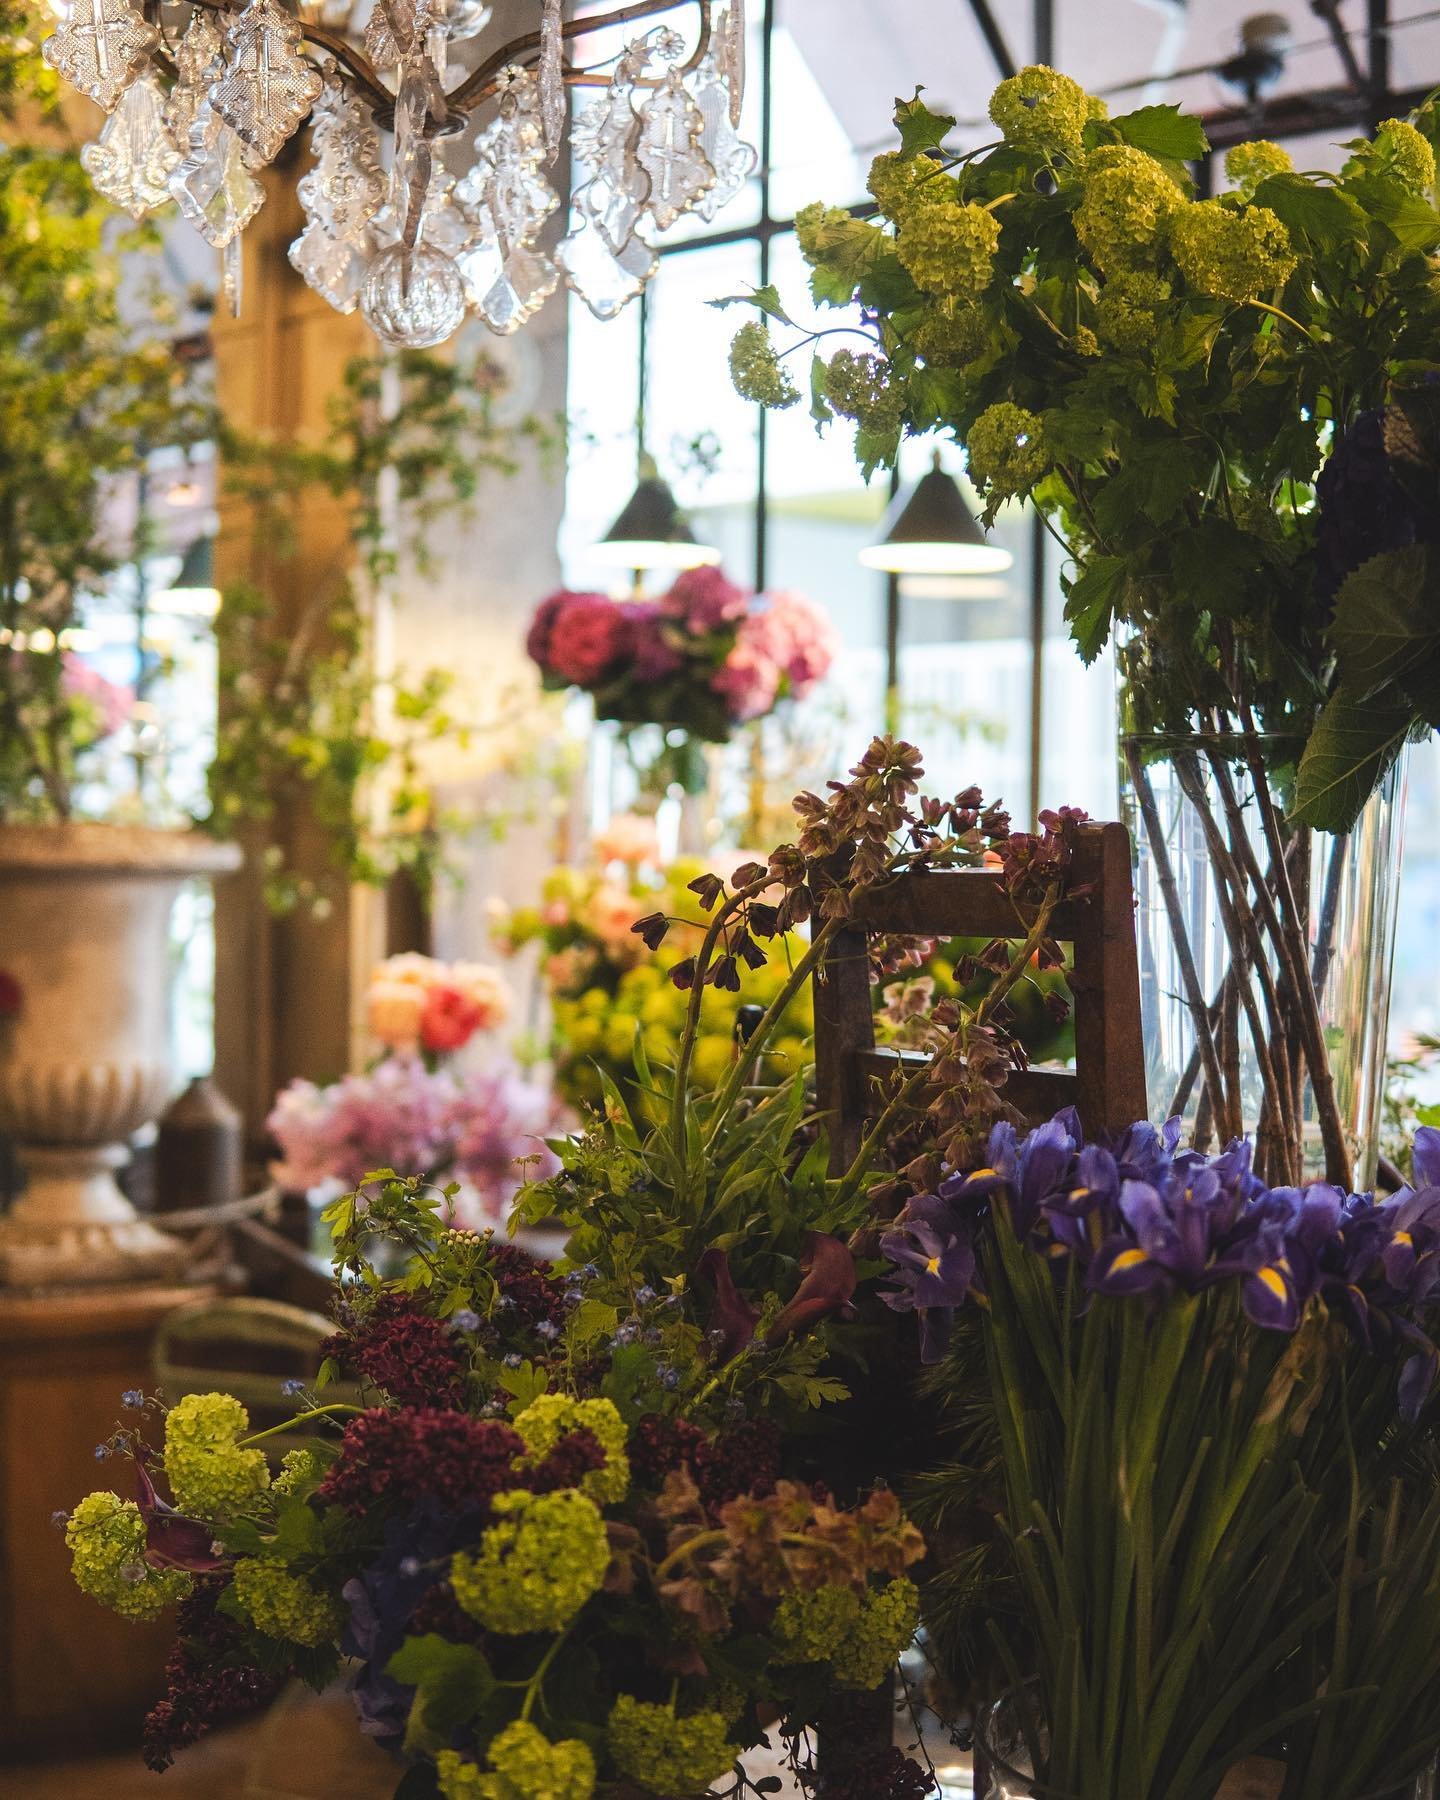 Spring at L&rsquo;Arrosoir feels special 🌿